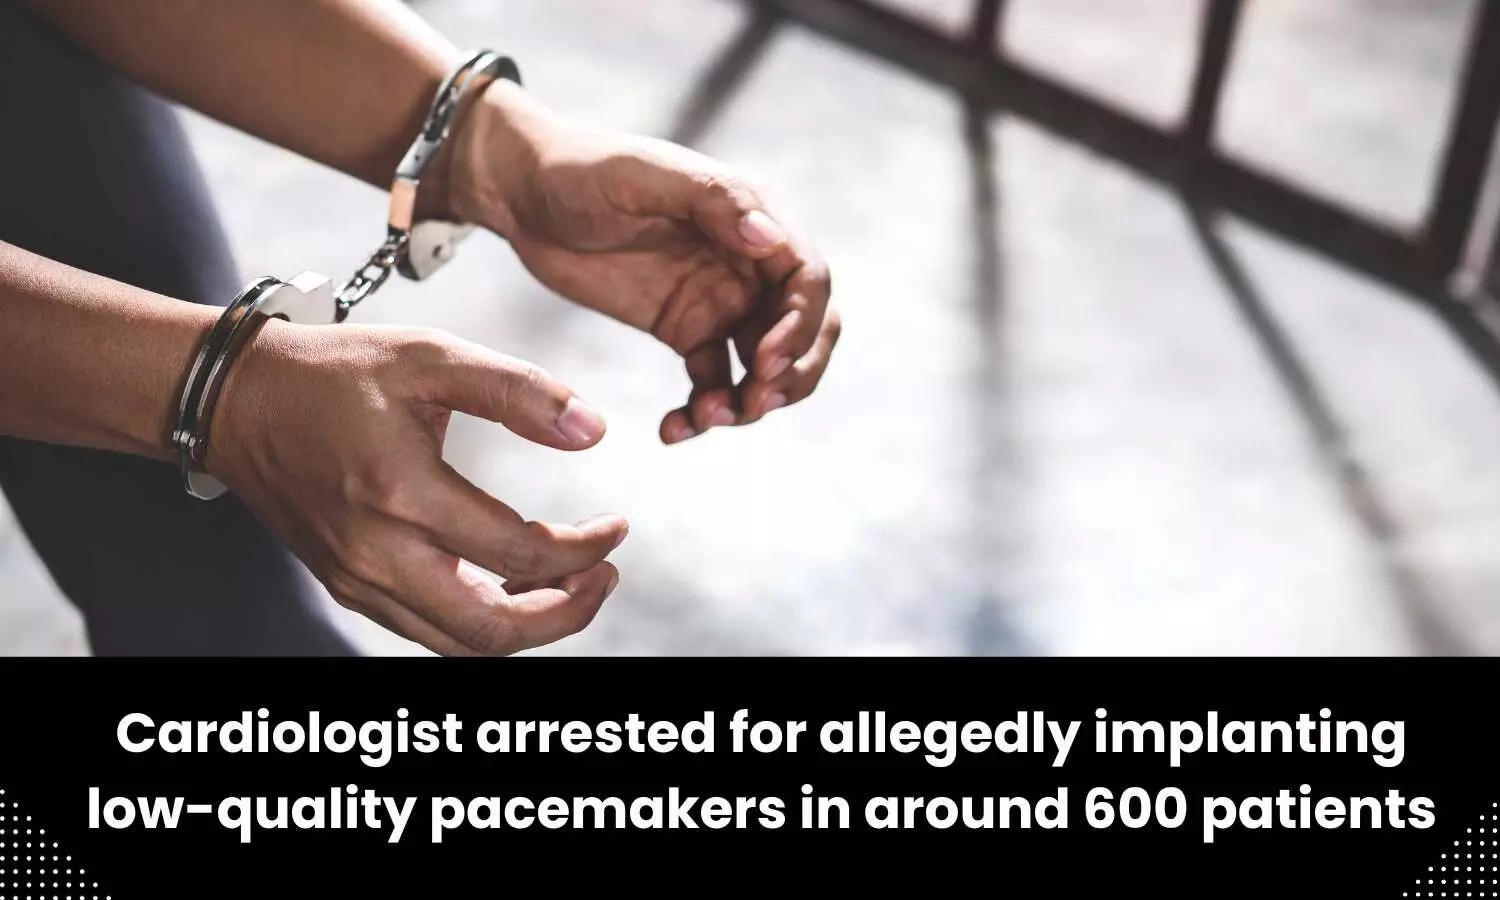 Cardiologist held for allegedly implanting low-quality pacemakers in around 600 patients